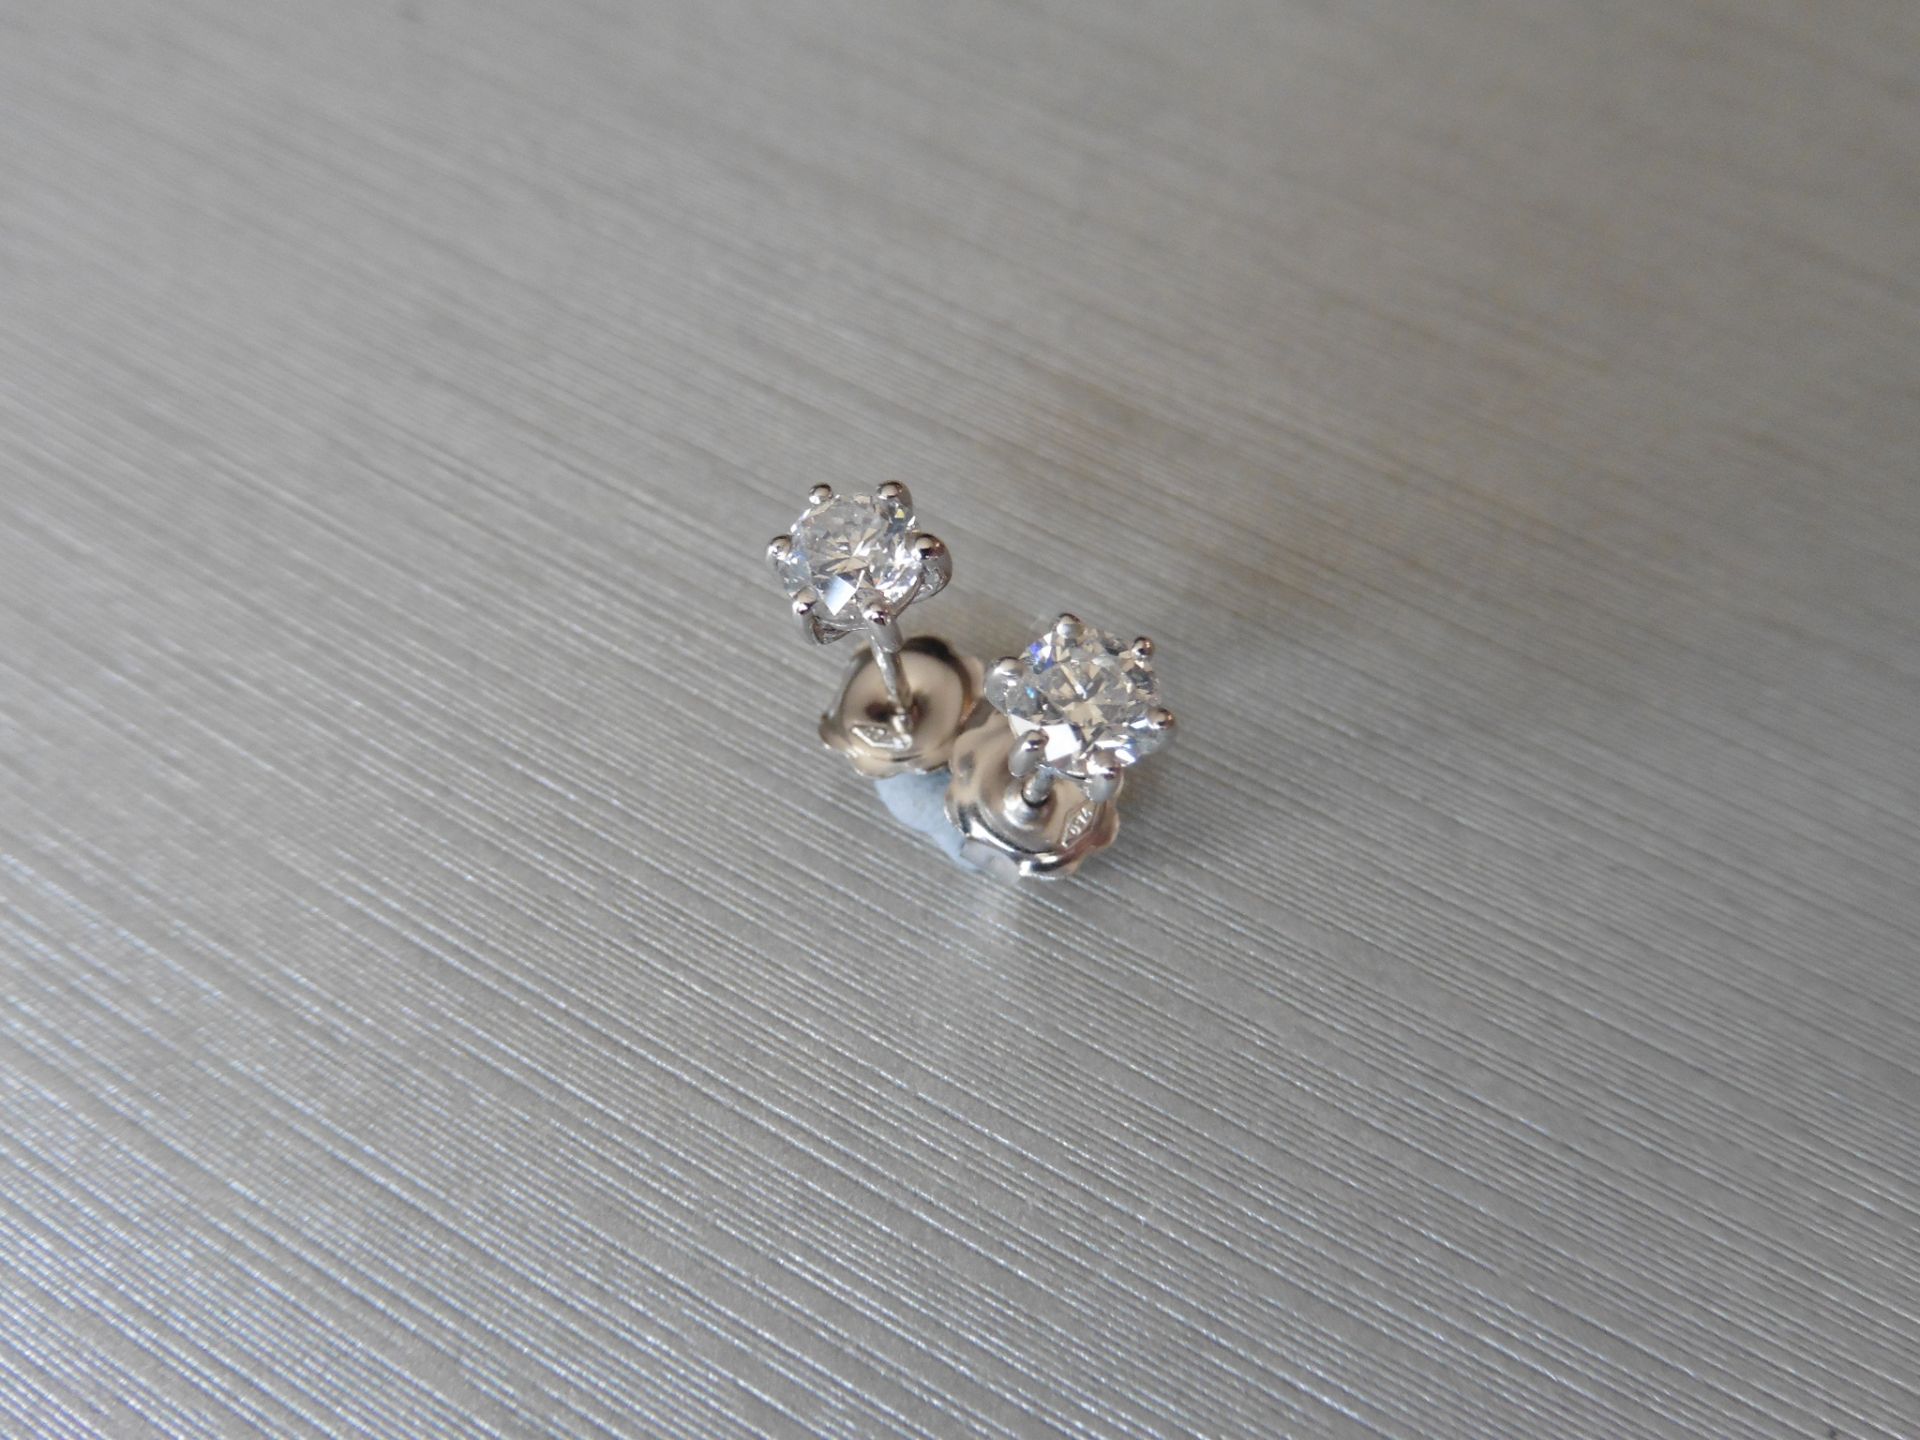 0.80ct Diamond solitaire earrings set with brilliant cut diamonds, I colour SI2 clarity. Six claw